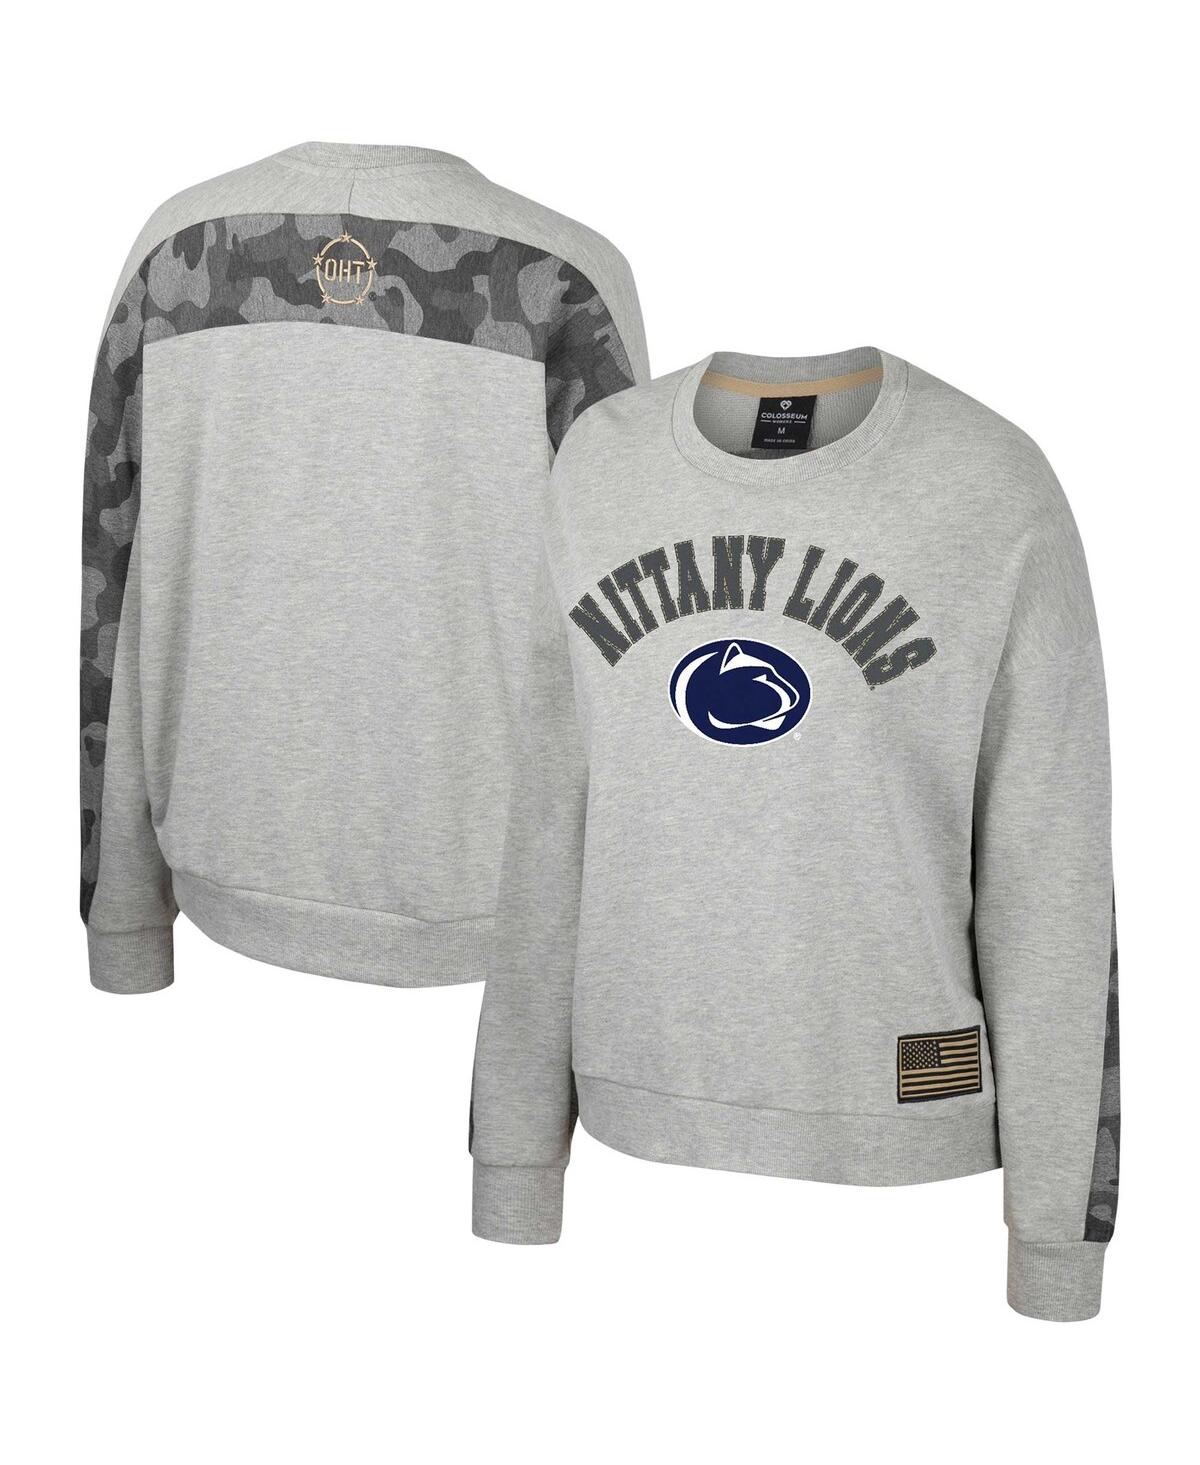 Shop Colosseum Women's  Heather Gray Penn State Nittany Lions Oht Military-inspired Appreciation Flag Rank